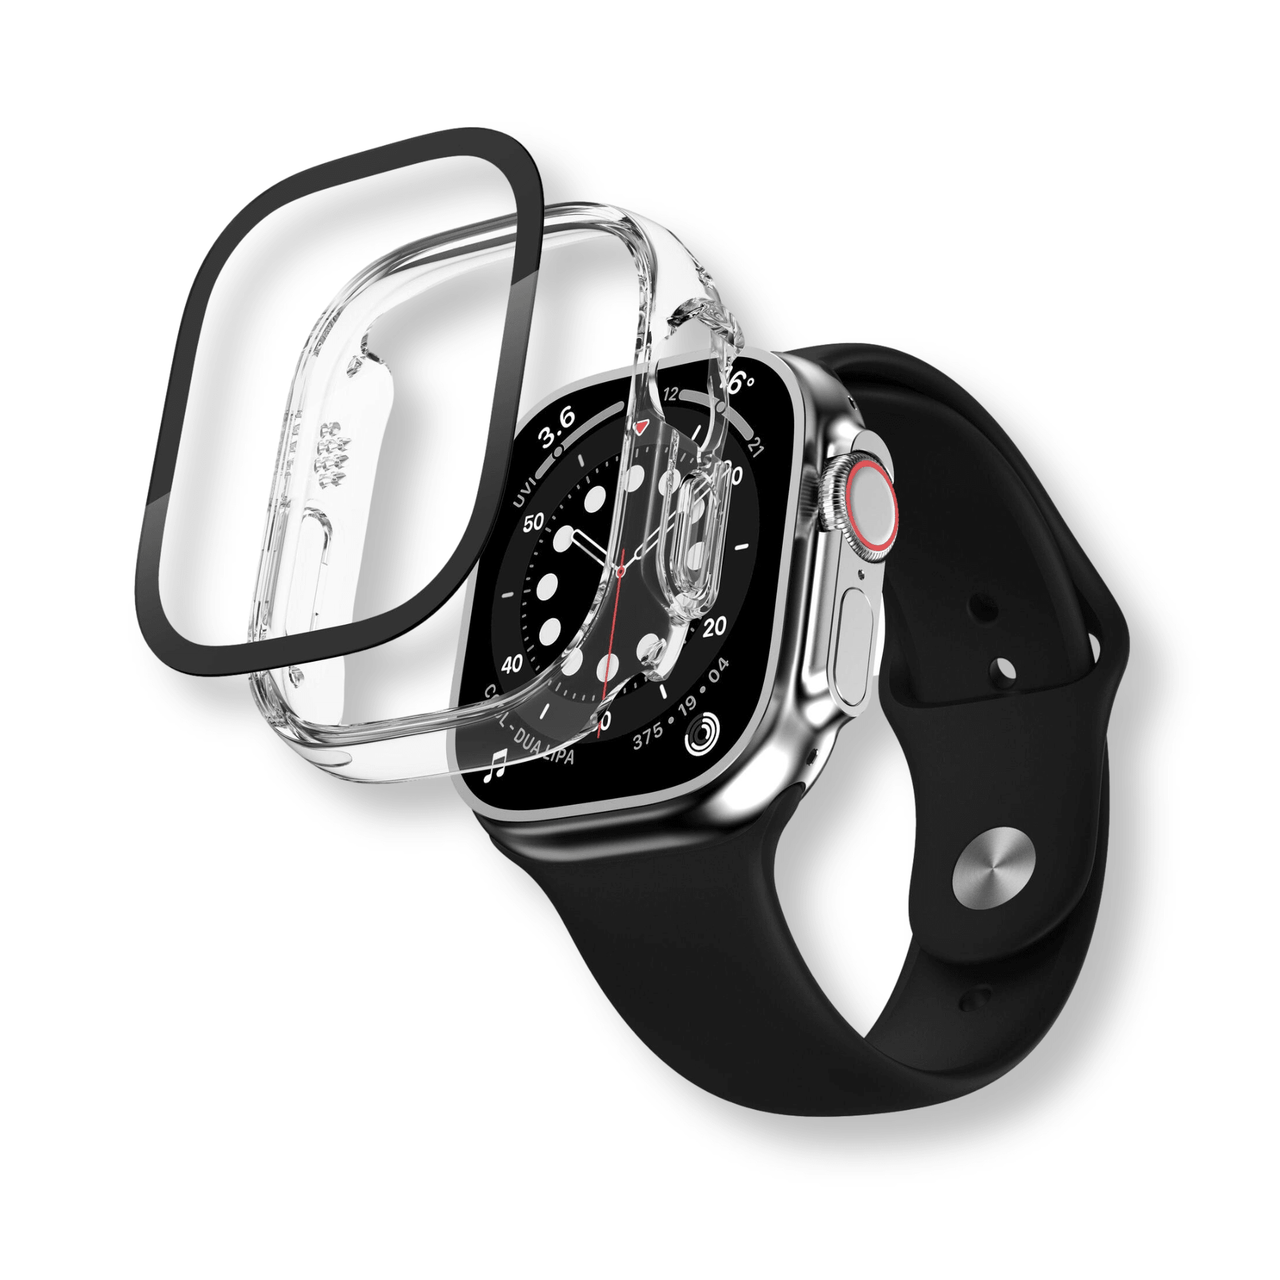 Two in one Protective Case for Apple Watch - watchband.direct